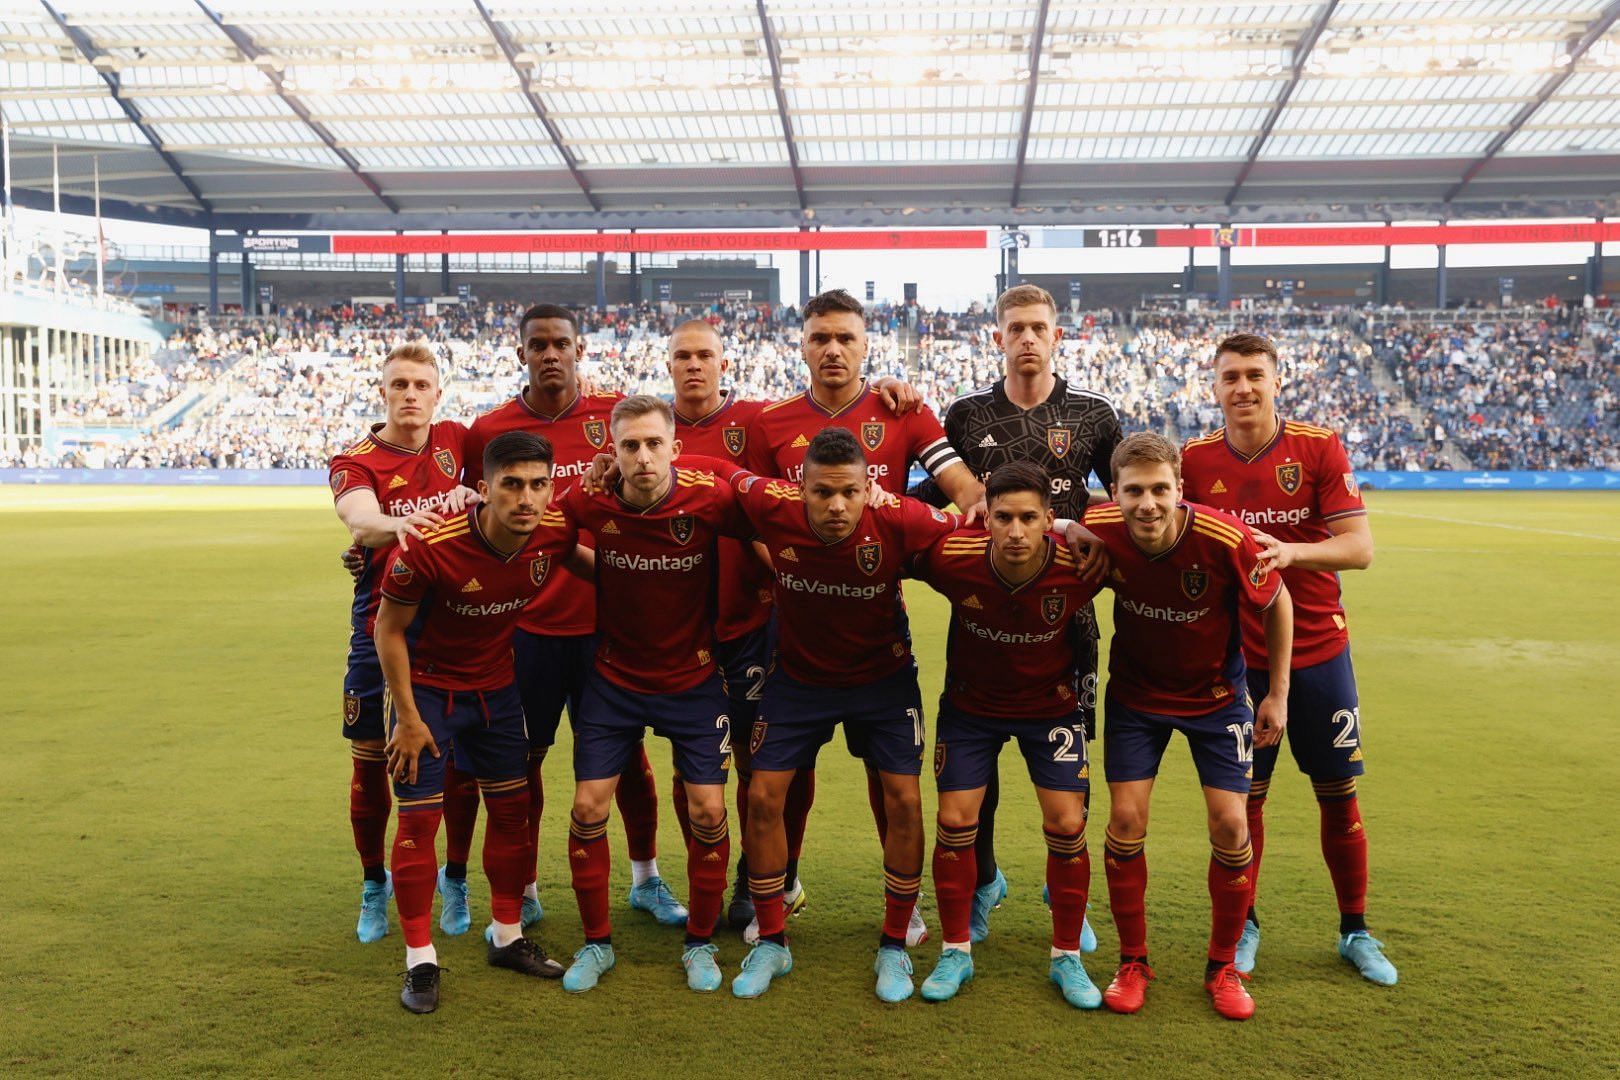 Real Salt Lake players pose for a team photo (cred: Real Salt Lake Twitter)